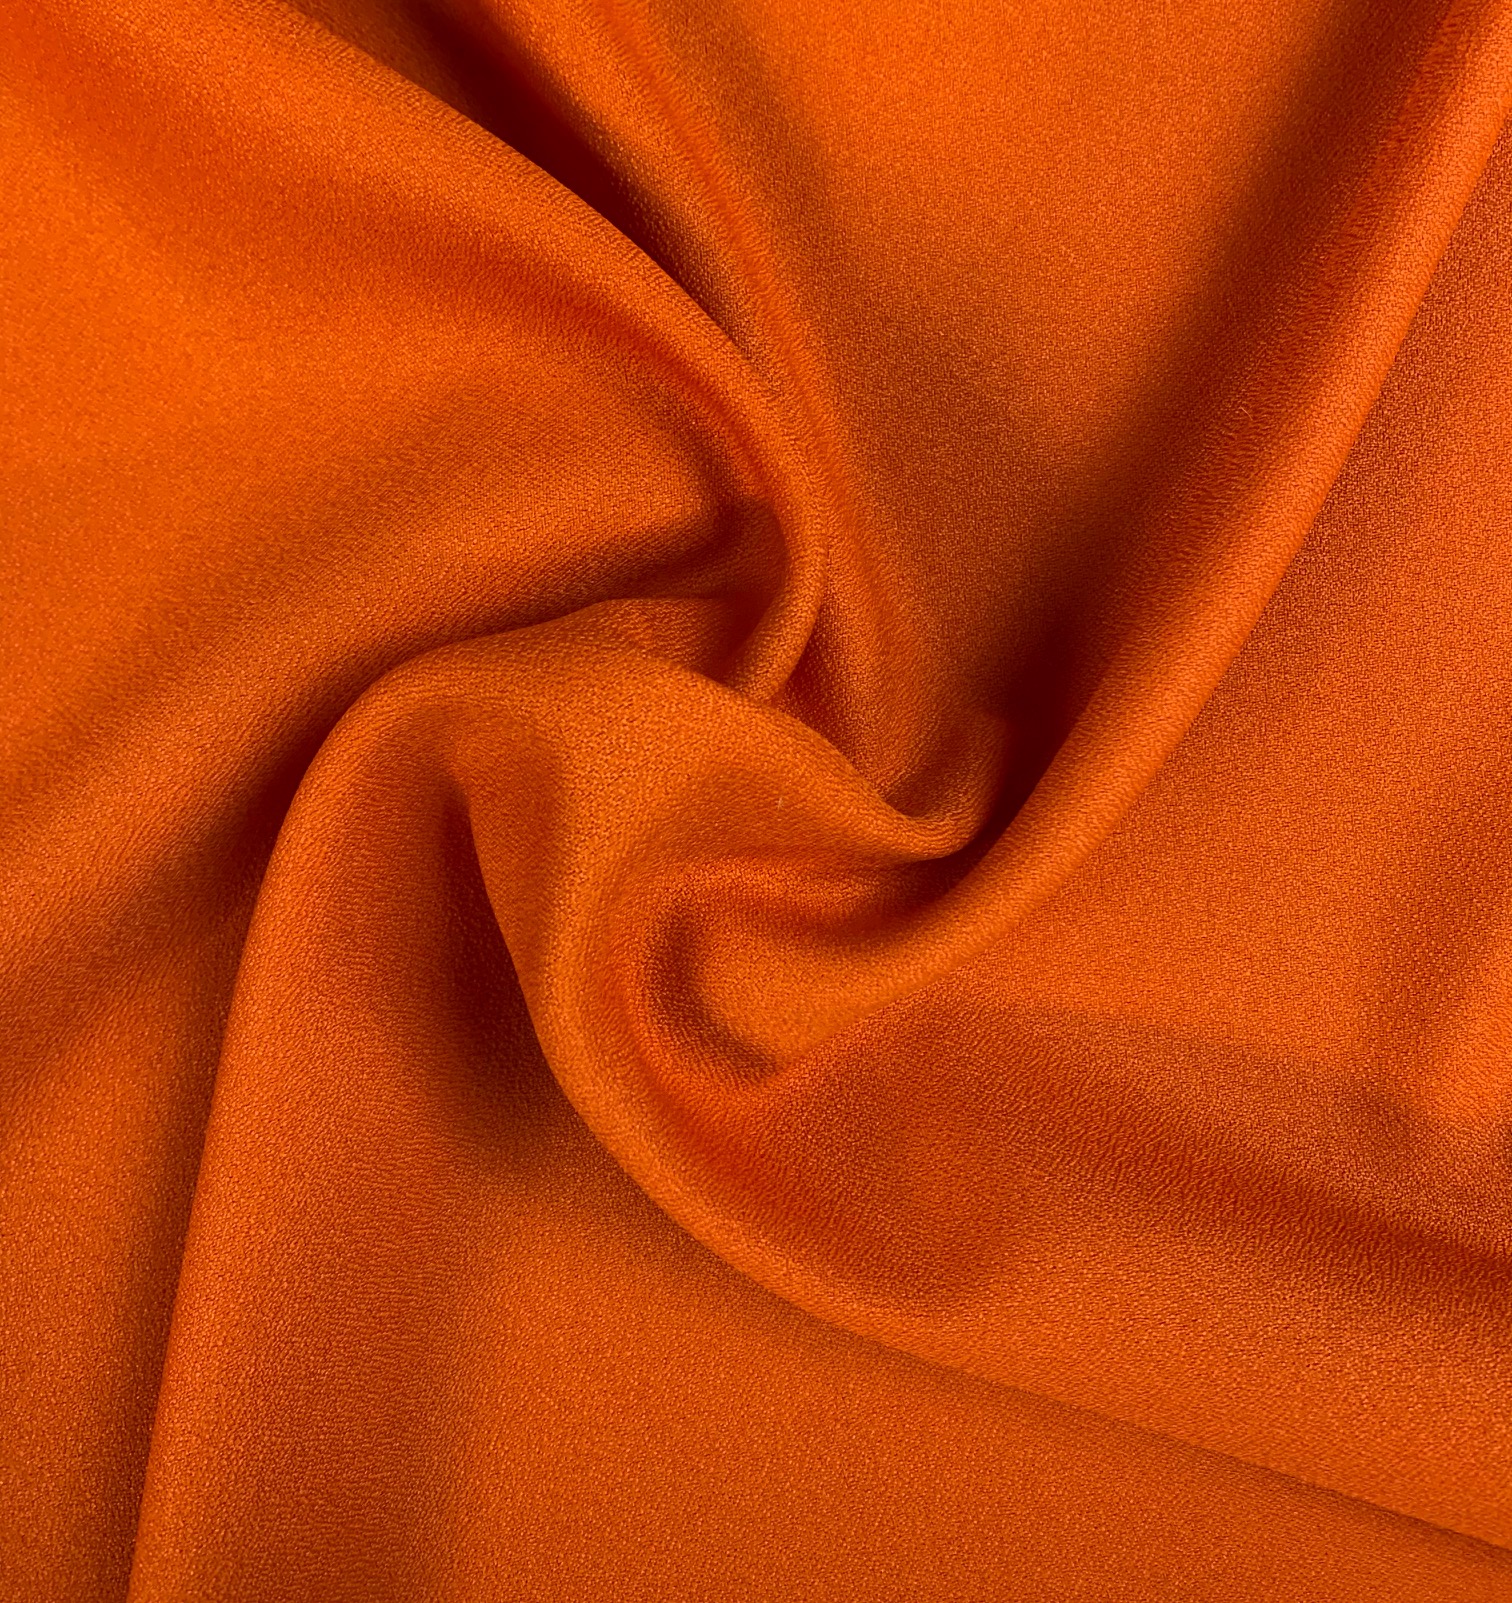 Orange Crepe Fabric - 60" By the yard (100% polyester)